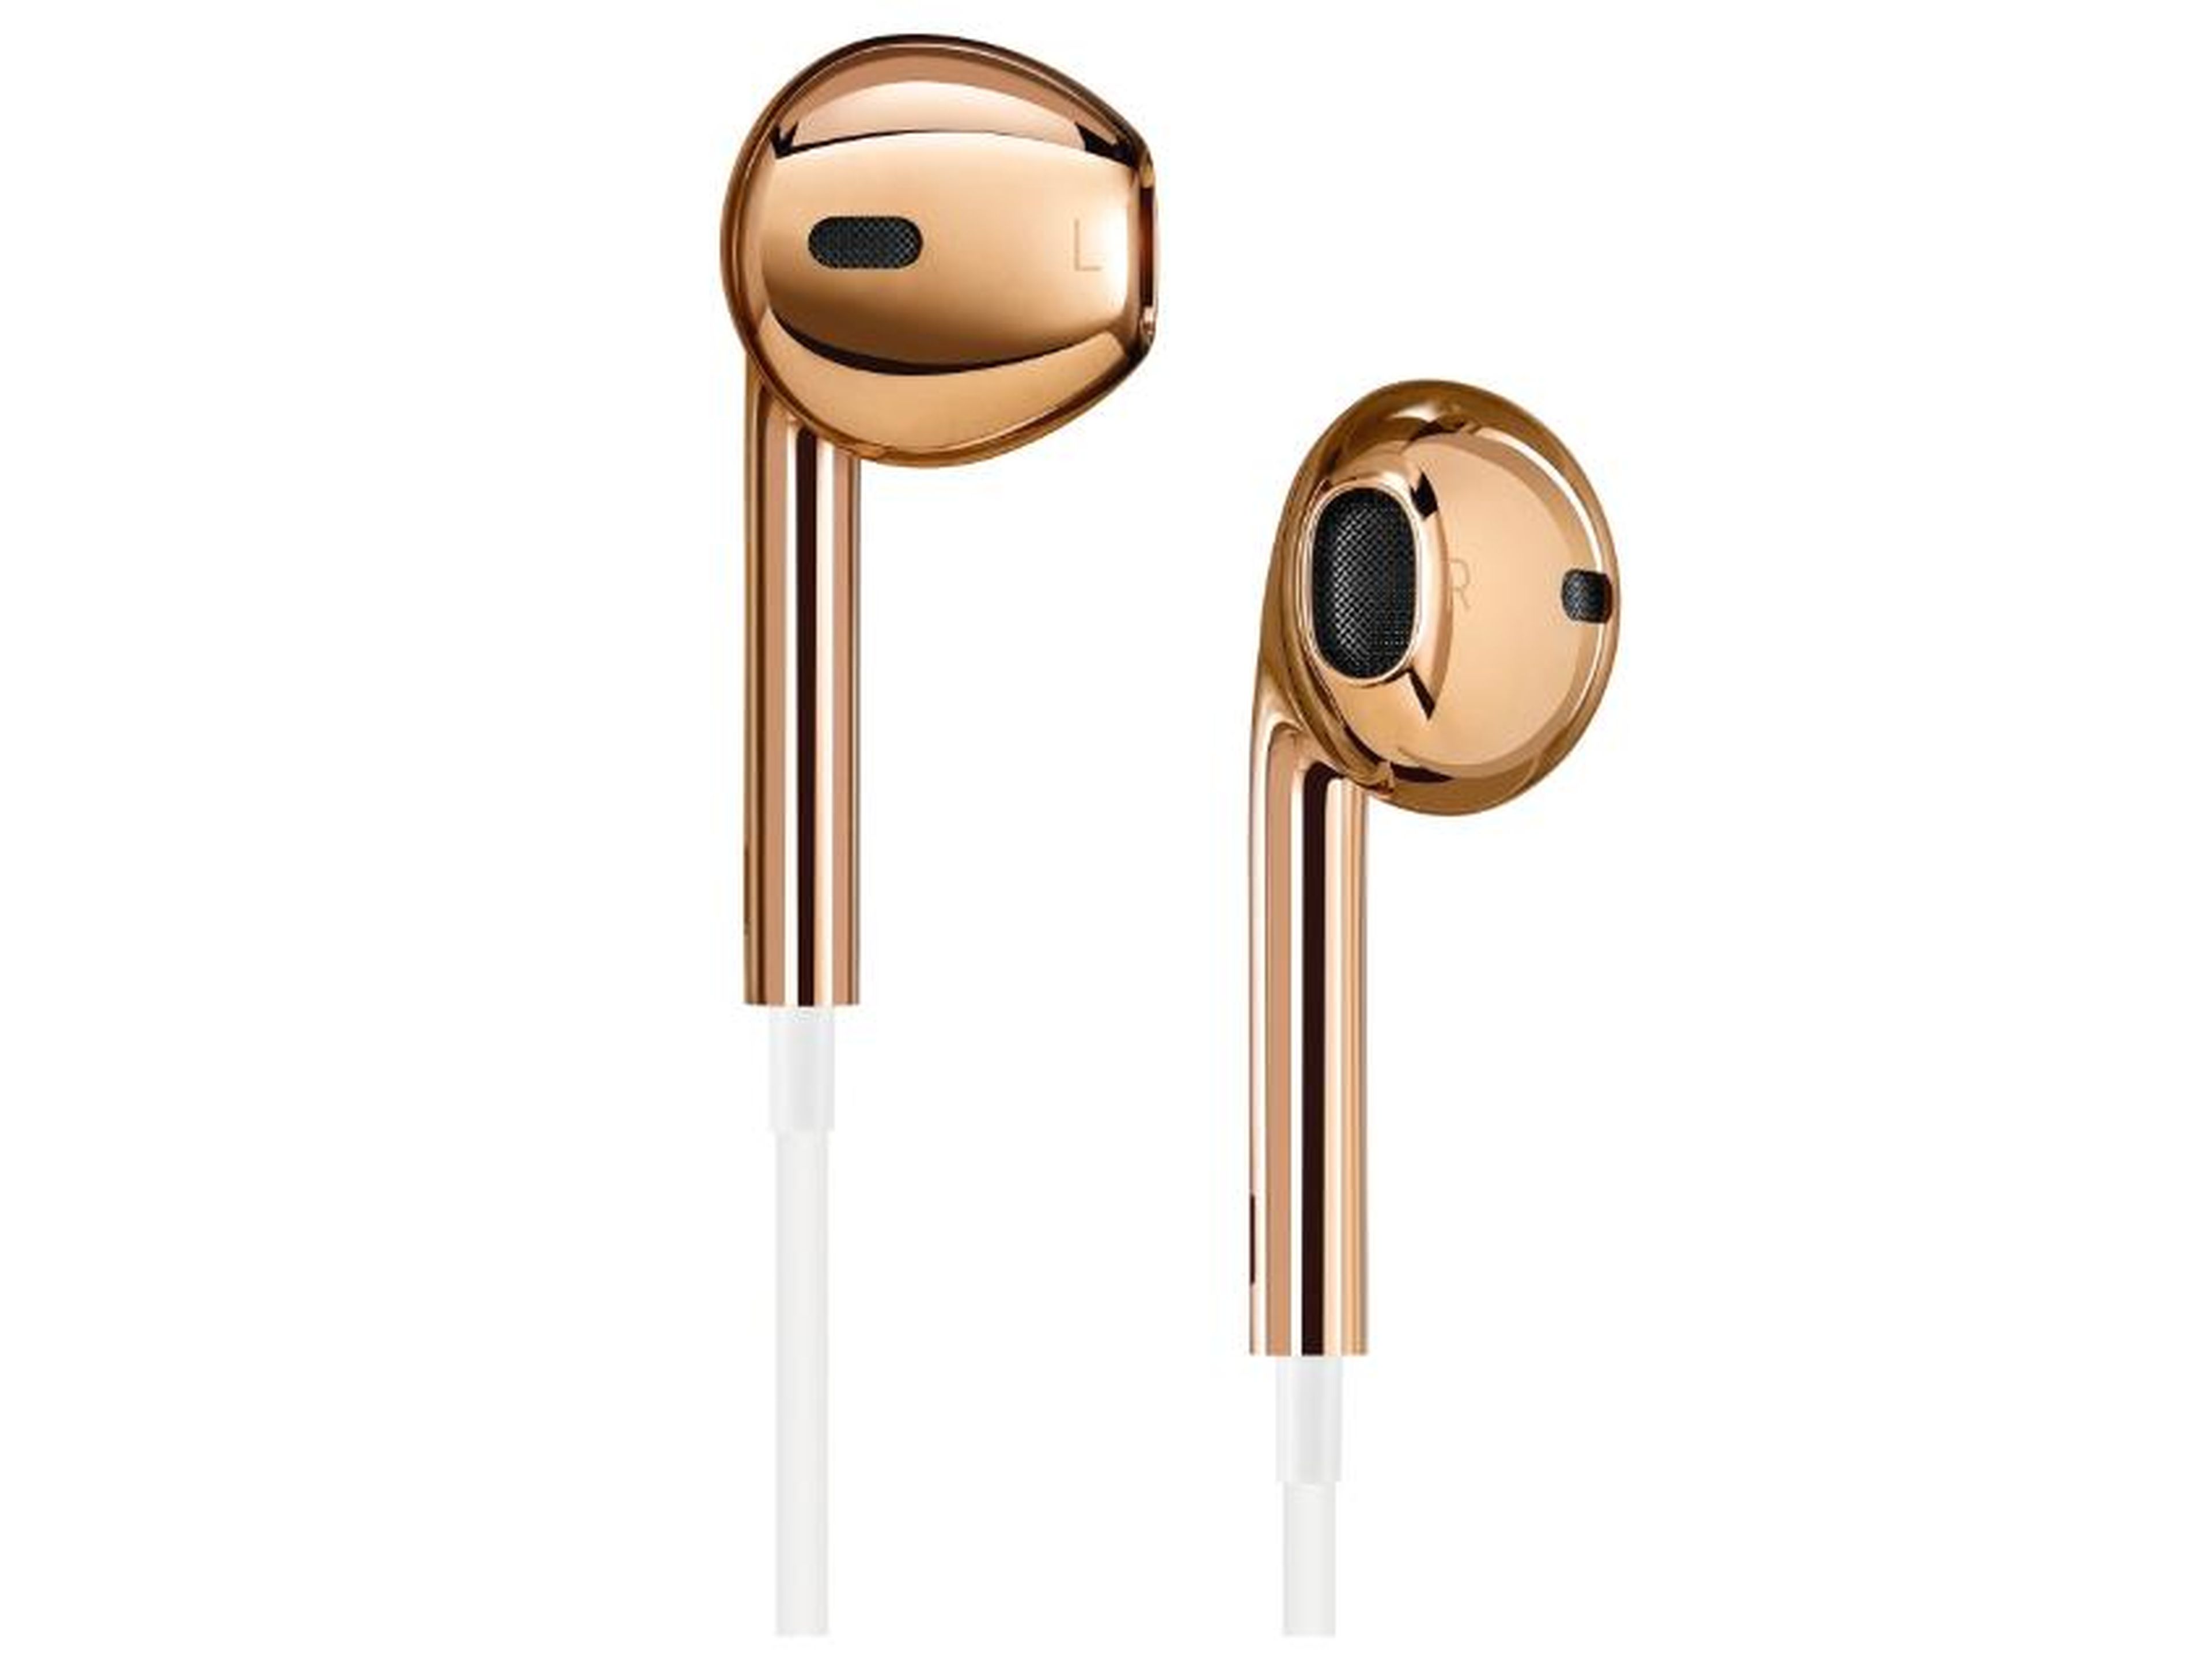 Gold Ear Pods, that sold for $461,000.